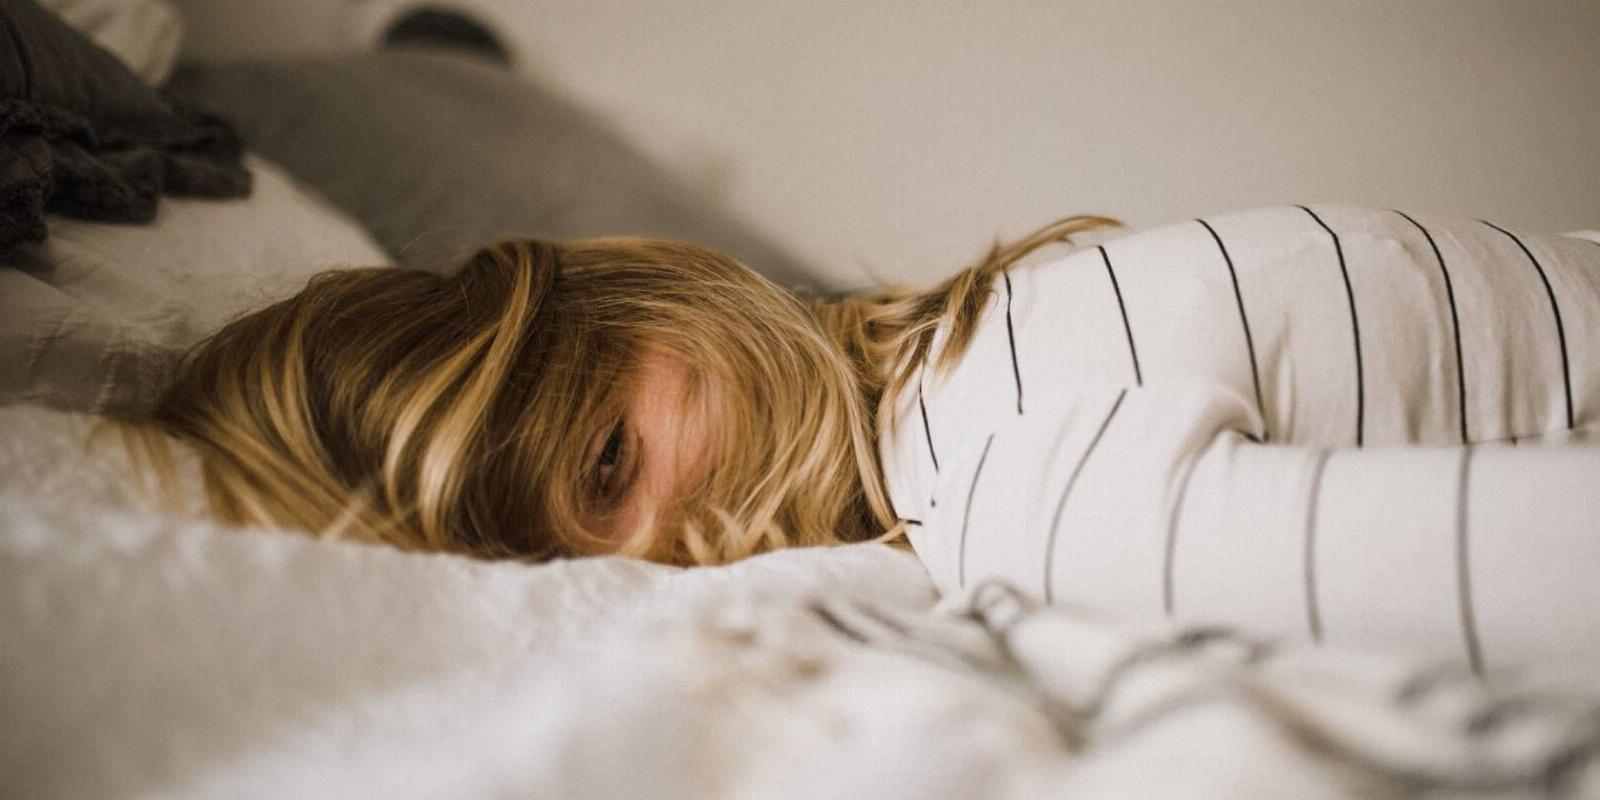 5 Sleep Apps and Websites to Fall Asleep Faster for a Good Night’s Rest